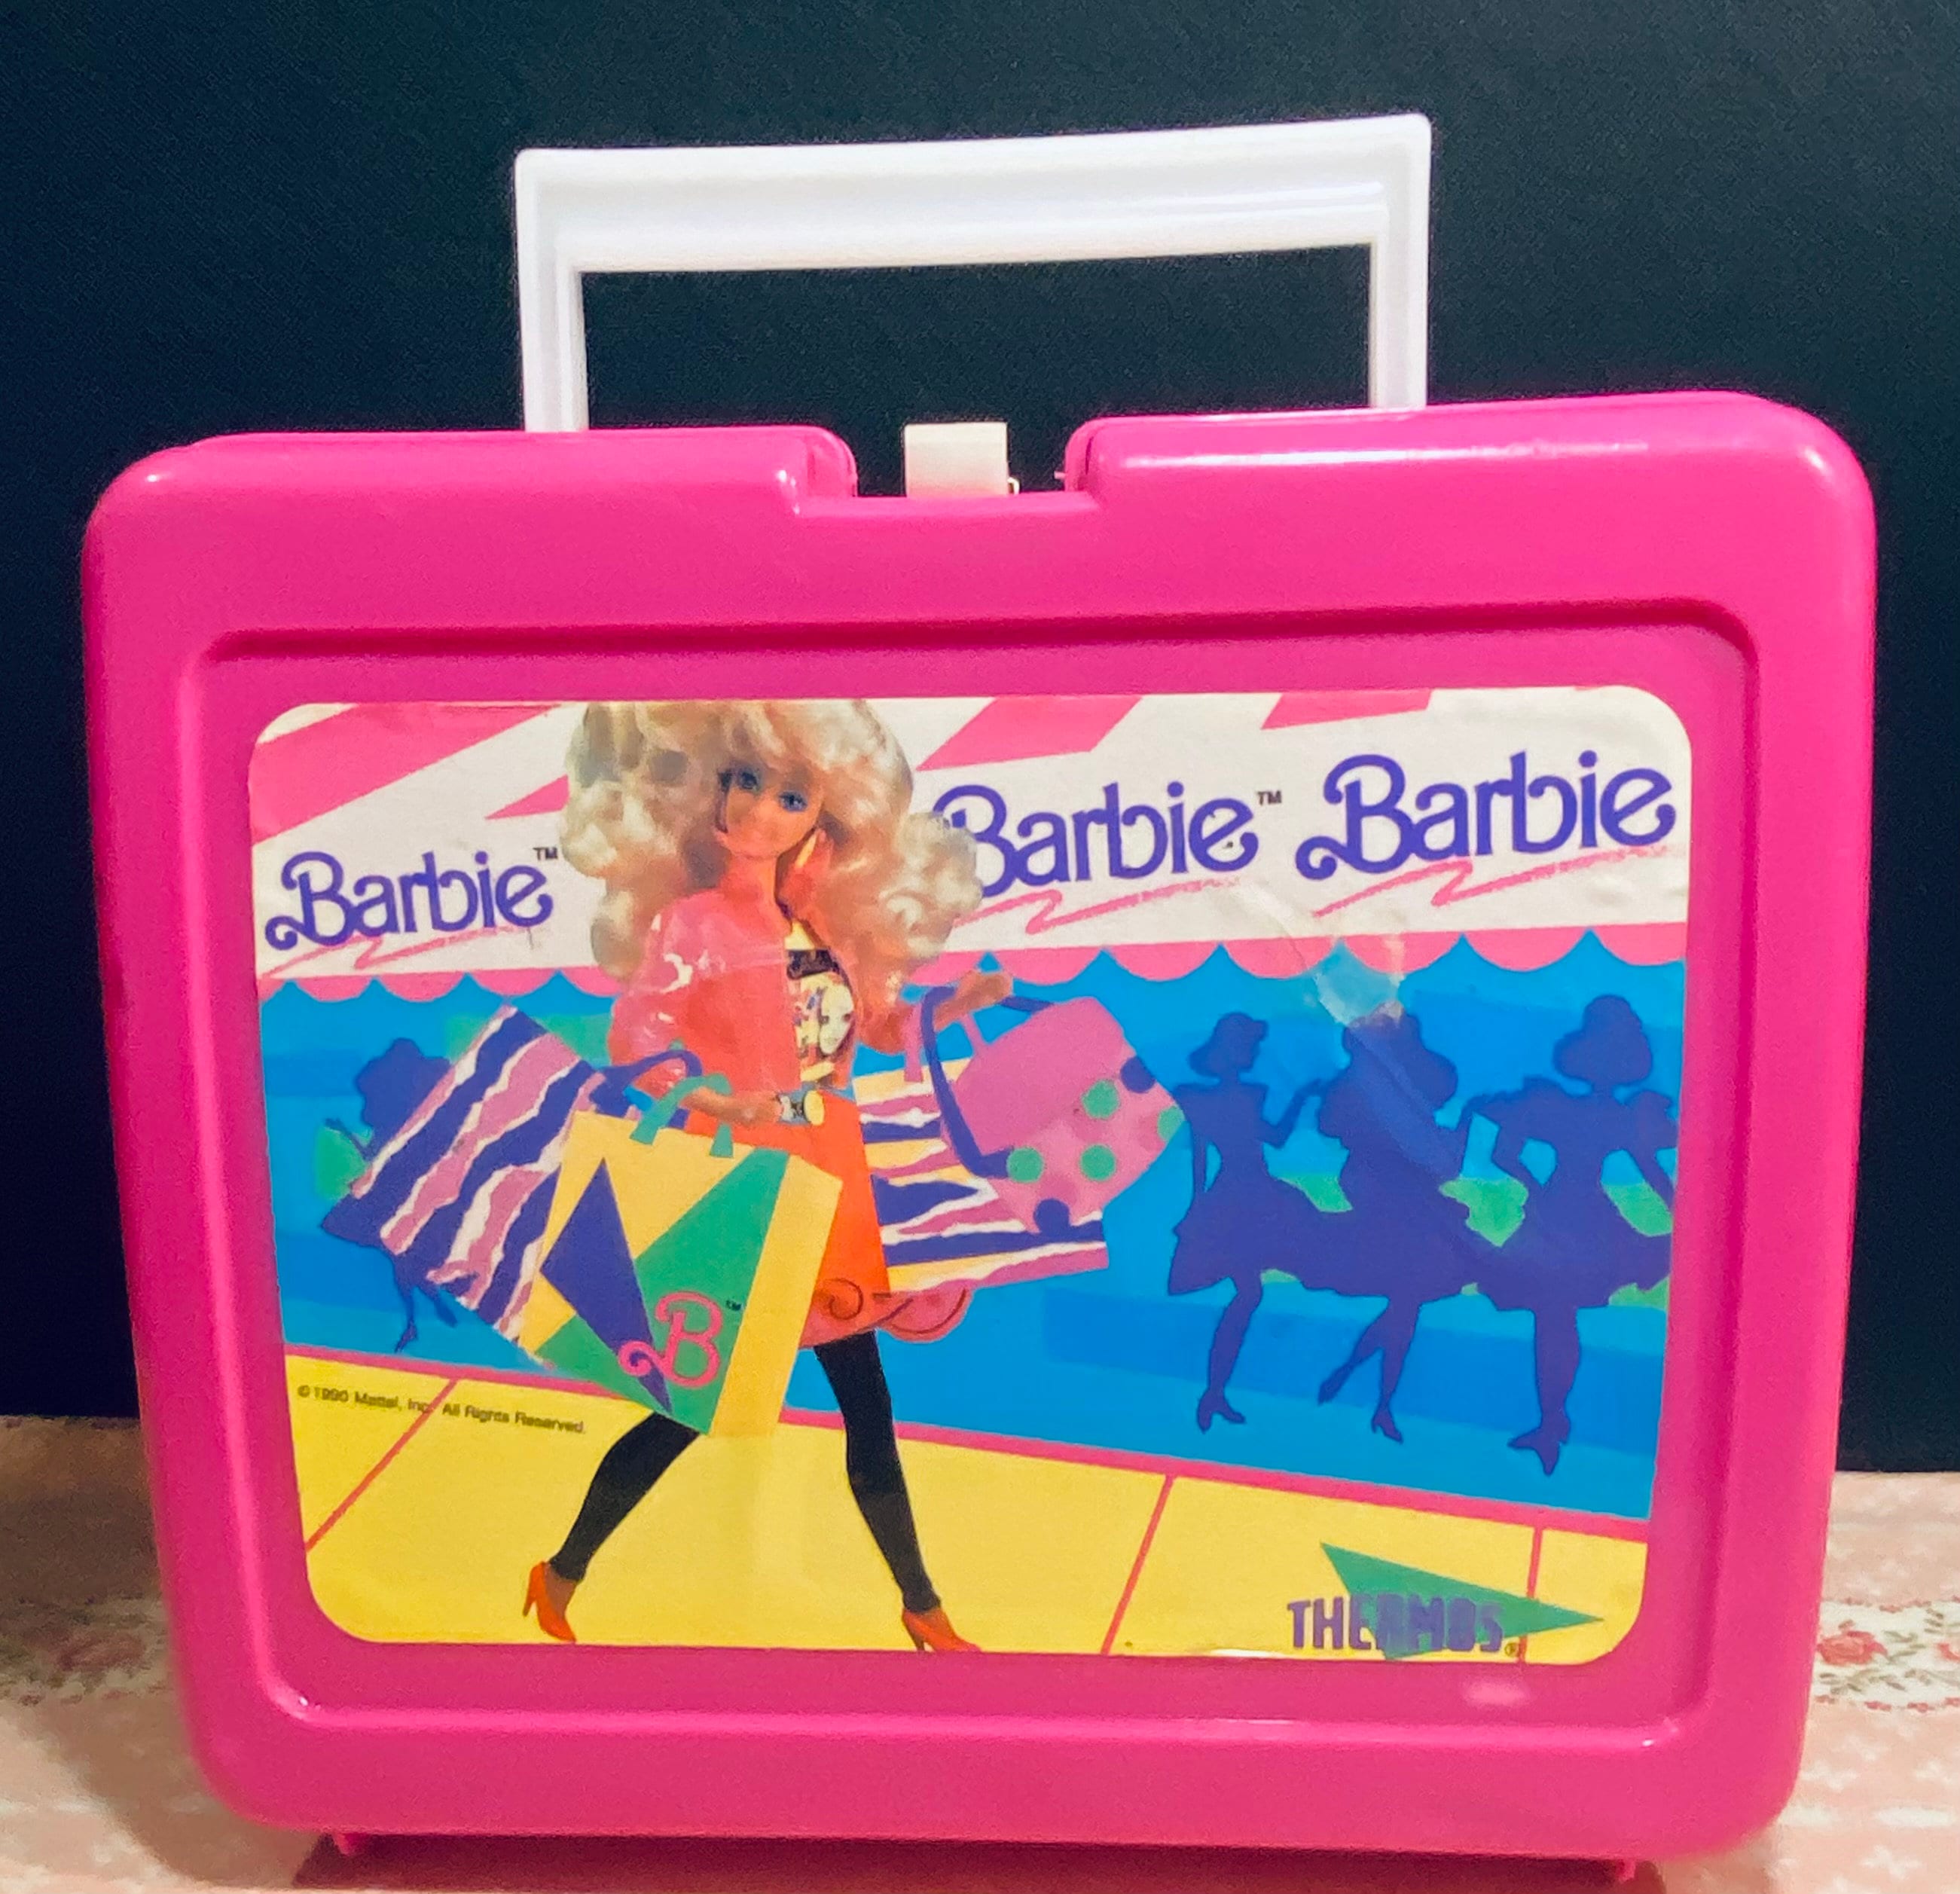 Barbie Lunch Box Camp Barbie for Girls vintage 80s 90's Blue